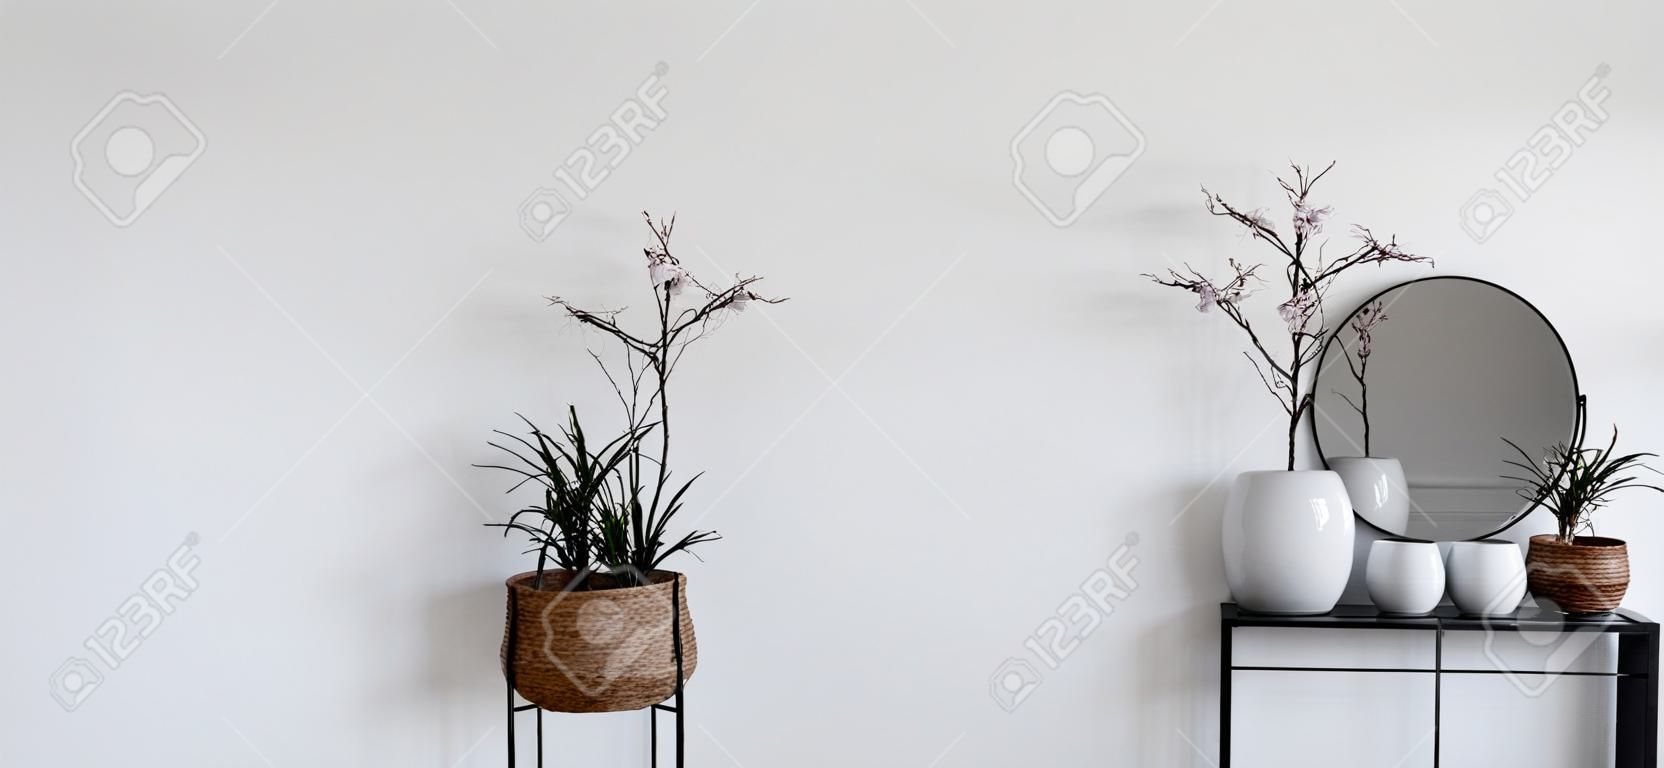 Single modern black display holding up mirror and potted plants in front of white wall. Includes copy space. 3d rendering